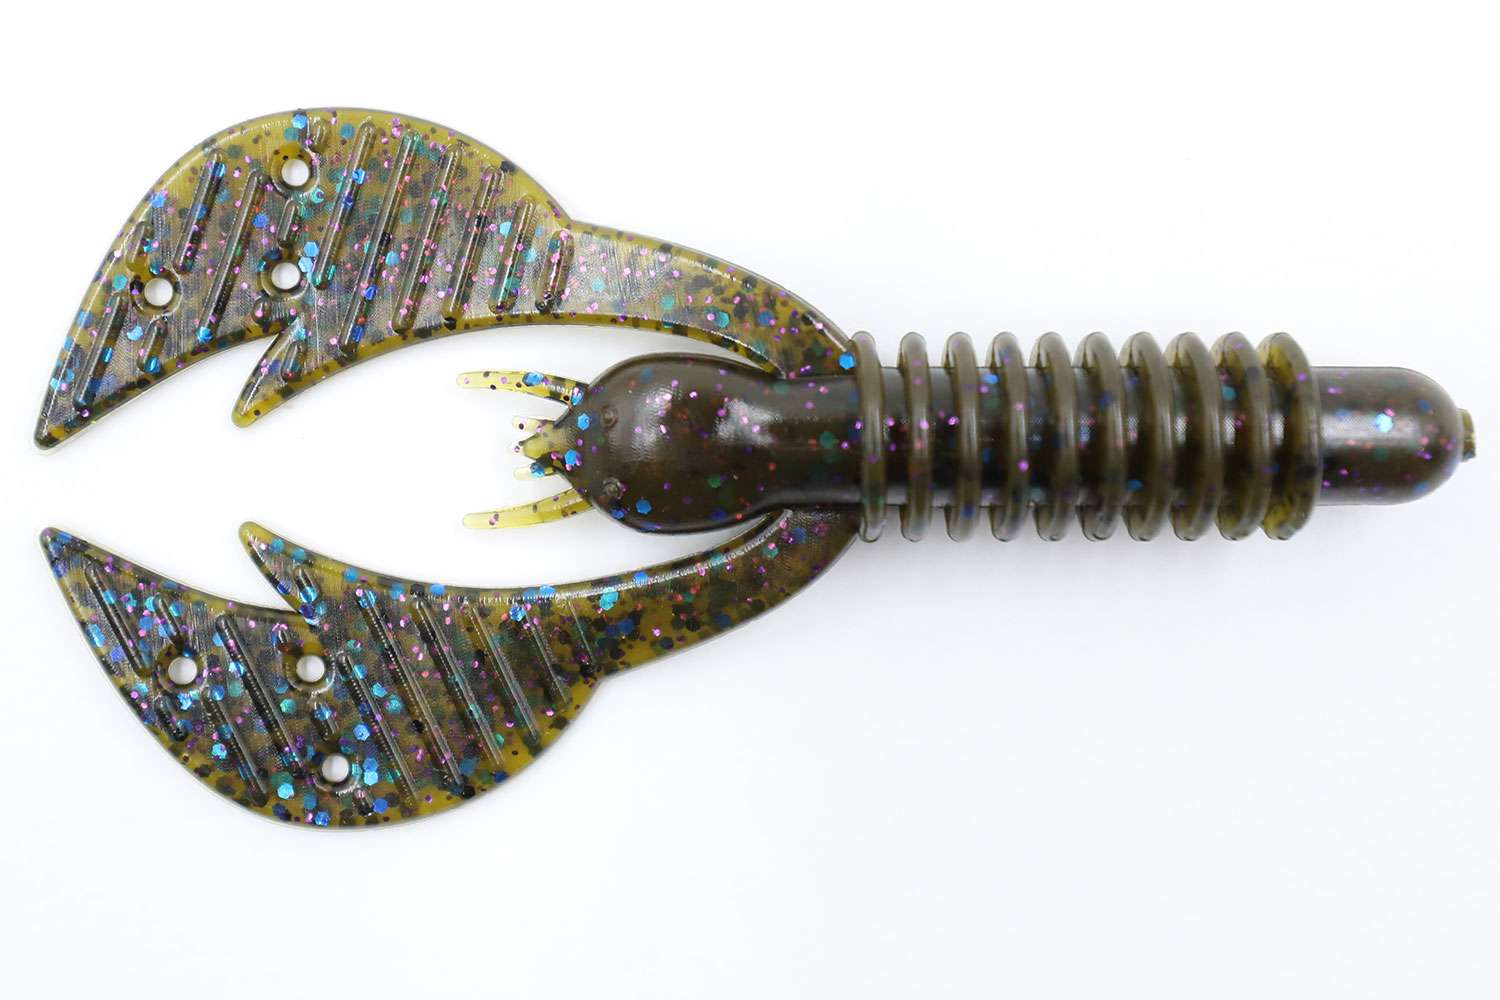  <B>Big Bite Baits Kamikaze Craw</B><BR>

Big Bite Baits is introducing a new craw called the Kamikaze Craw that can be used as either a jig trailer or rigged onto your favorite EWG hook and fished Texas style. The Kamikaze Craw comes built with a large solid body core for easy rigging with either a jig or EWG hook, and is equipped with a ribbed body section for added action and skin hooking applications. Added ridges and holes built into the craws create an aggressive swimming and flapping action when retrieved. The Kamikaze Craw is 3 3/4 inches in length, comes in a six-pack and will be available in 11 of Big Bites top fish-catching colors. <BR>

<B>MSRP: $3.99</B>